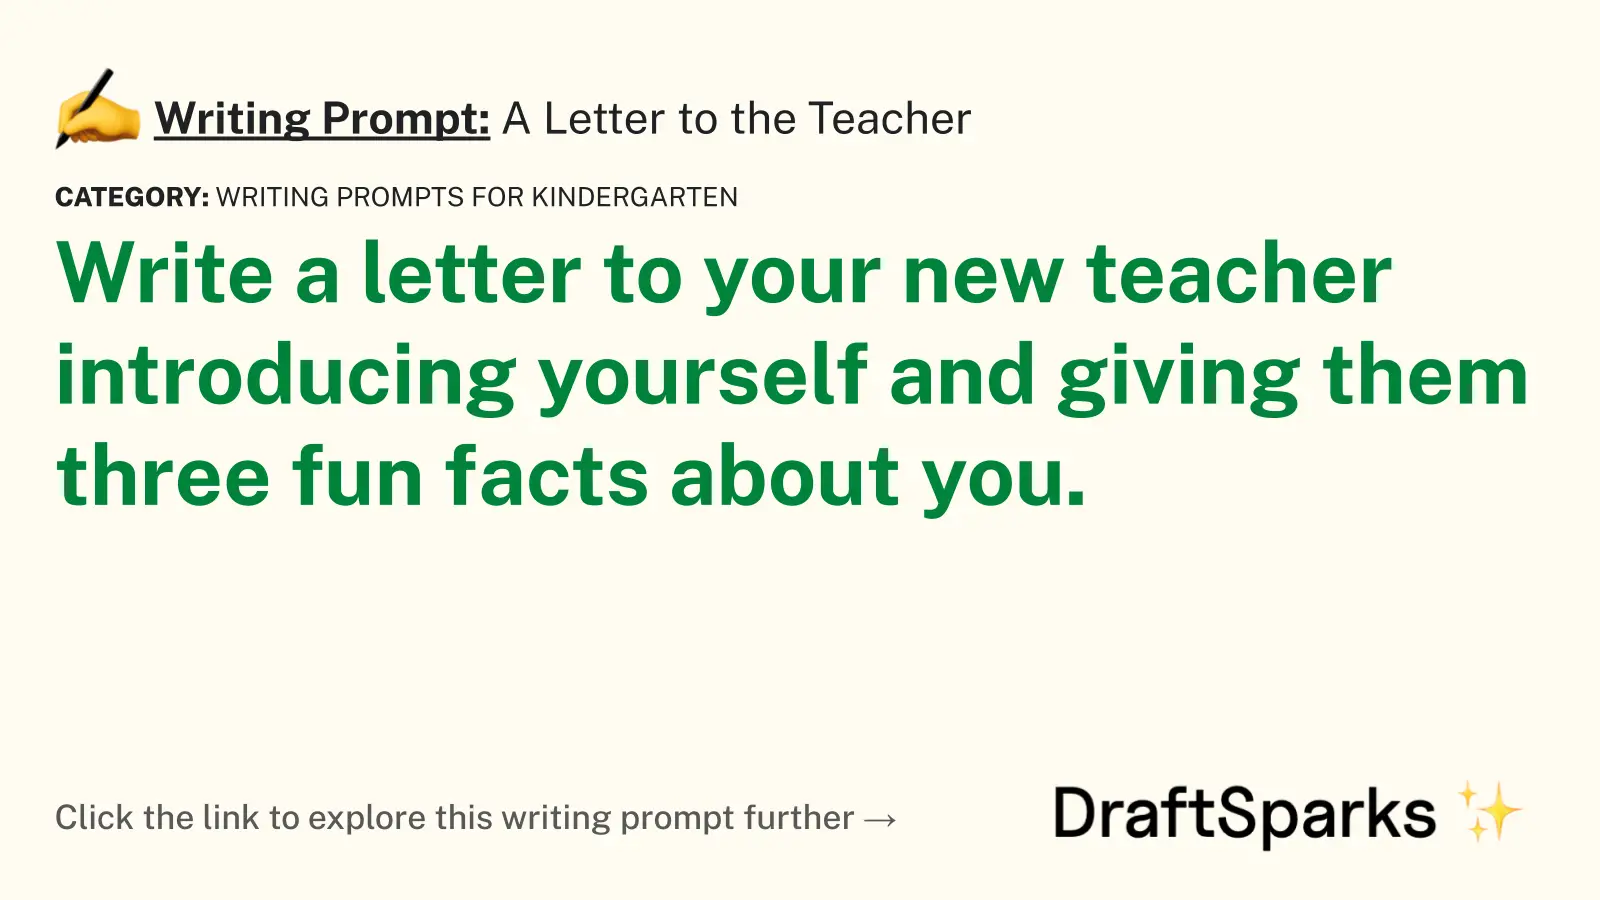 A Letter to the Teacher